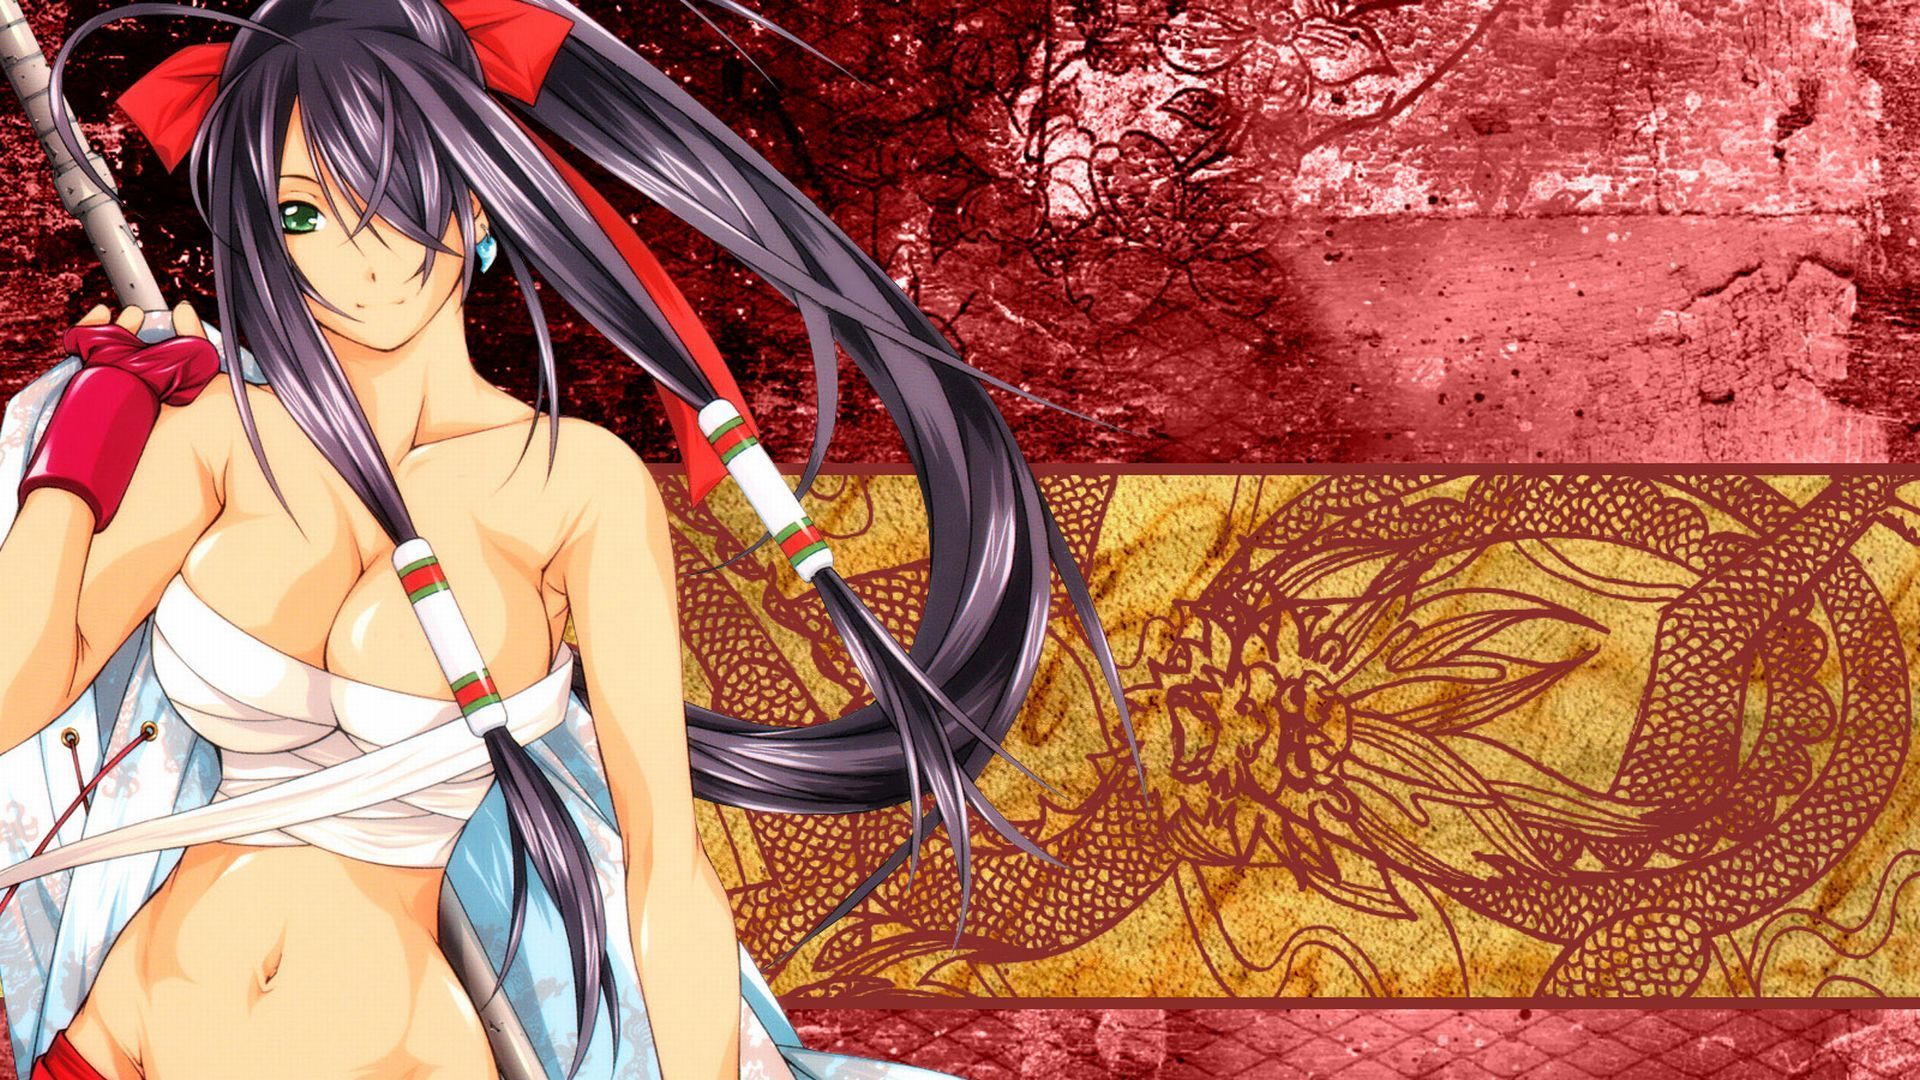 Hot Girl Anime 1080p Hd Wallpaper | Download wallpapers page